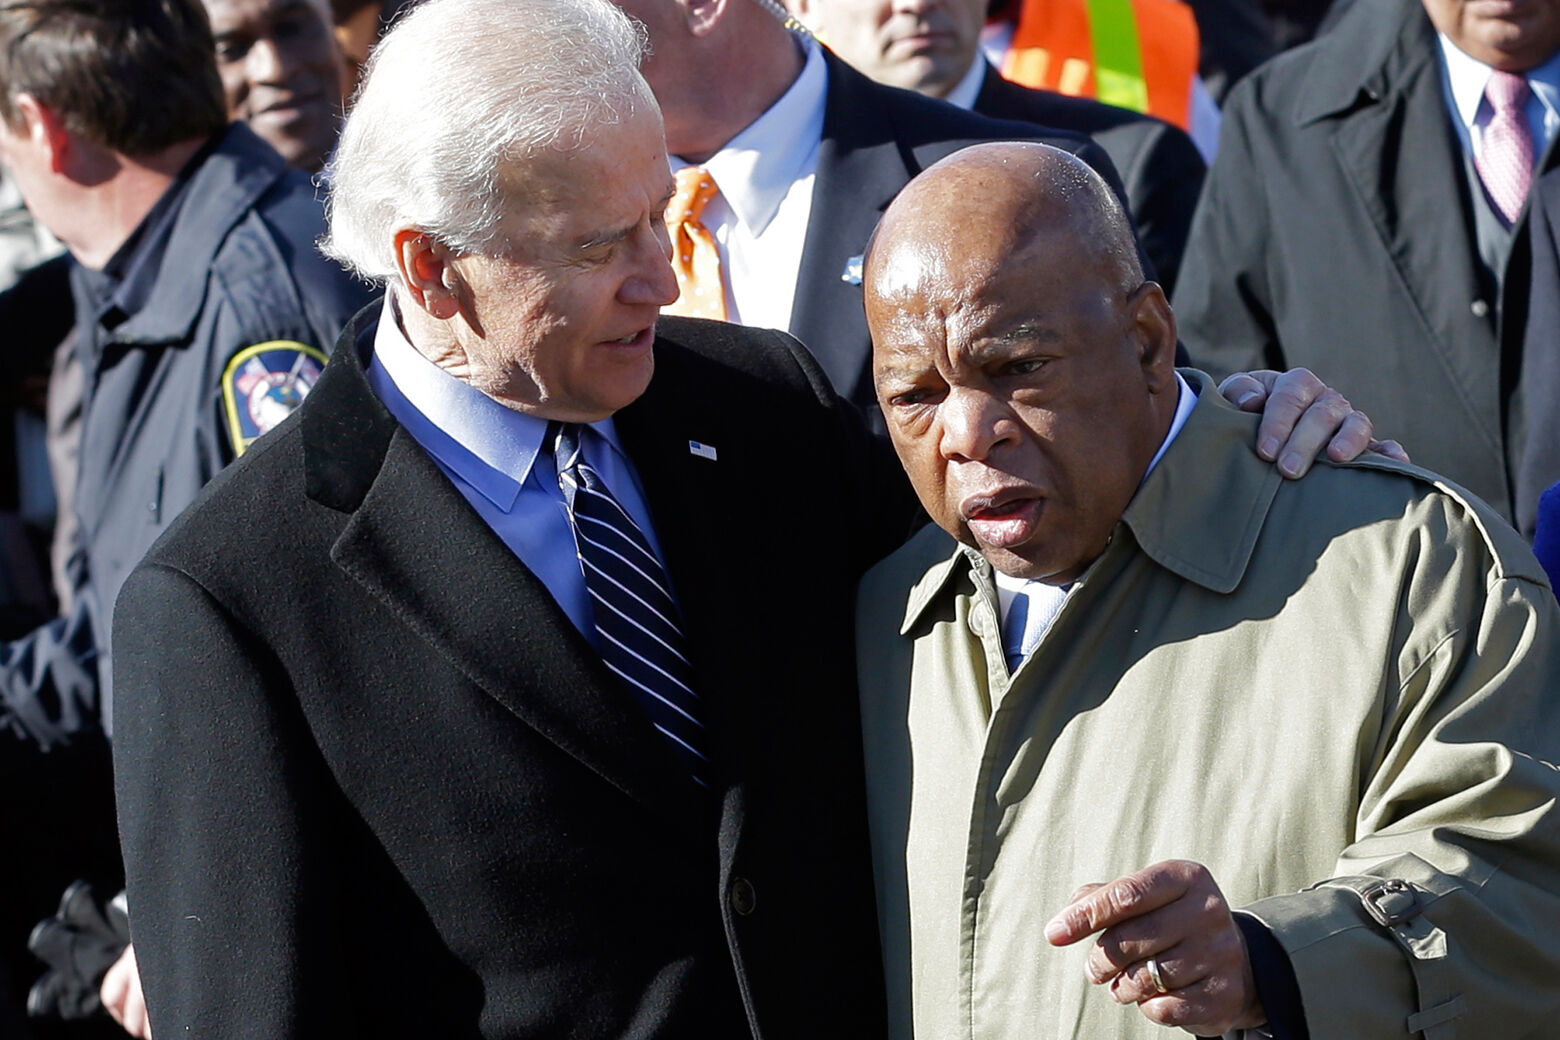 FILE - In this March 3, 2013, file photo, Vice President Joe Biden, left, embraces U.S. Rep. John Lewis, D-Ga., as they prepare to lead a group across the Edmund Pettus Bridge in Selma, Ala. Civil rights icon Lewis is backing Biden for president, giving the prospective Democratic nominee perhaps his biggest symbolic endorsement among the many veteran black lawmakers who back his candidacy. â€œWe need his voice,â€ the 80-year-old Lewis told reporters ahead of the campaign's Tuesday, April 7, 2020 announcement. (AP Photo/Dave Martin, File)